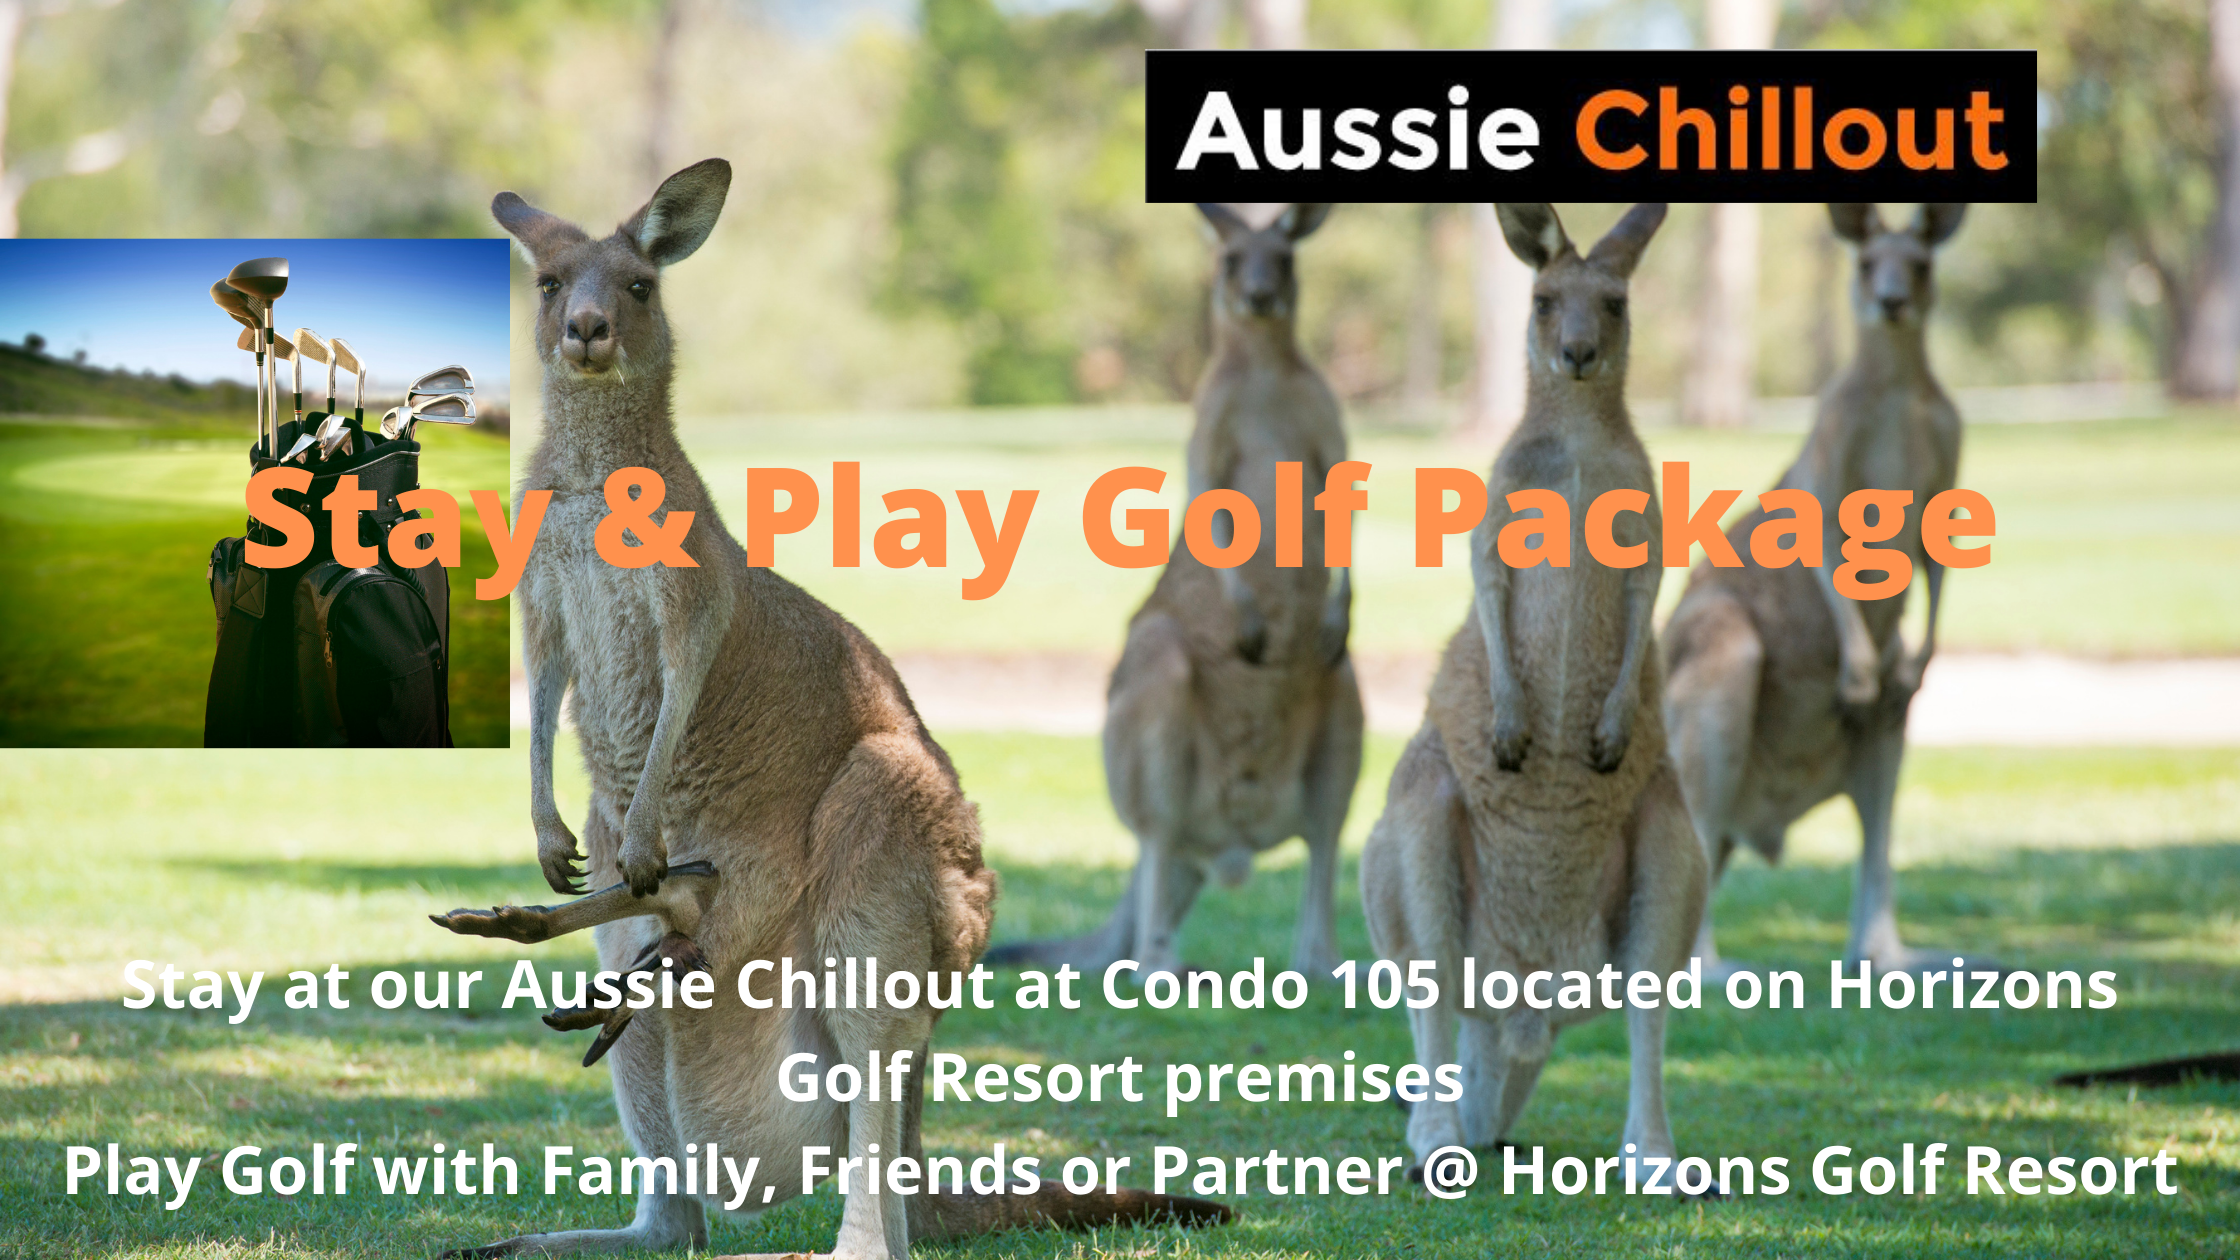 Stay and Play Golf Package with Aussie Chillout and Horizons Golf Resort